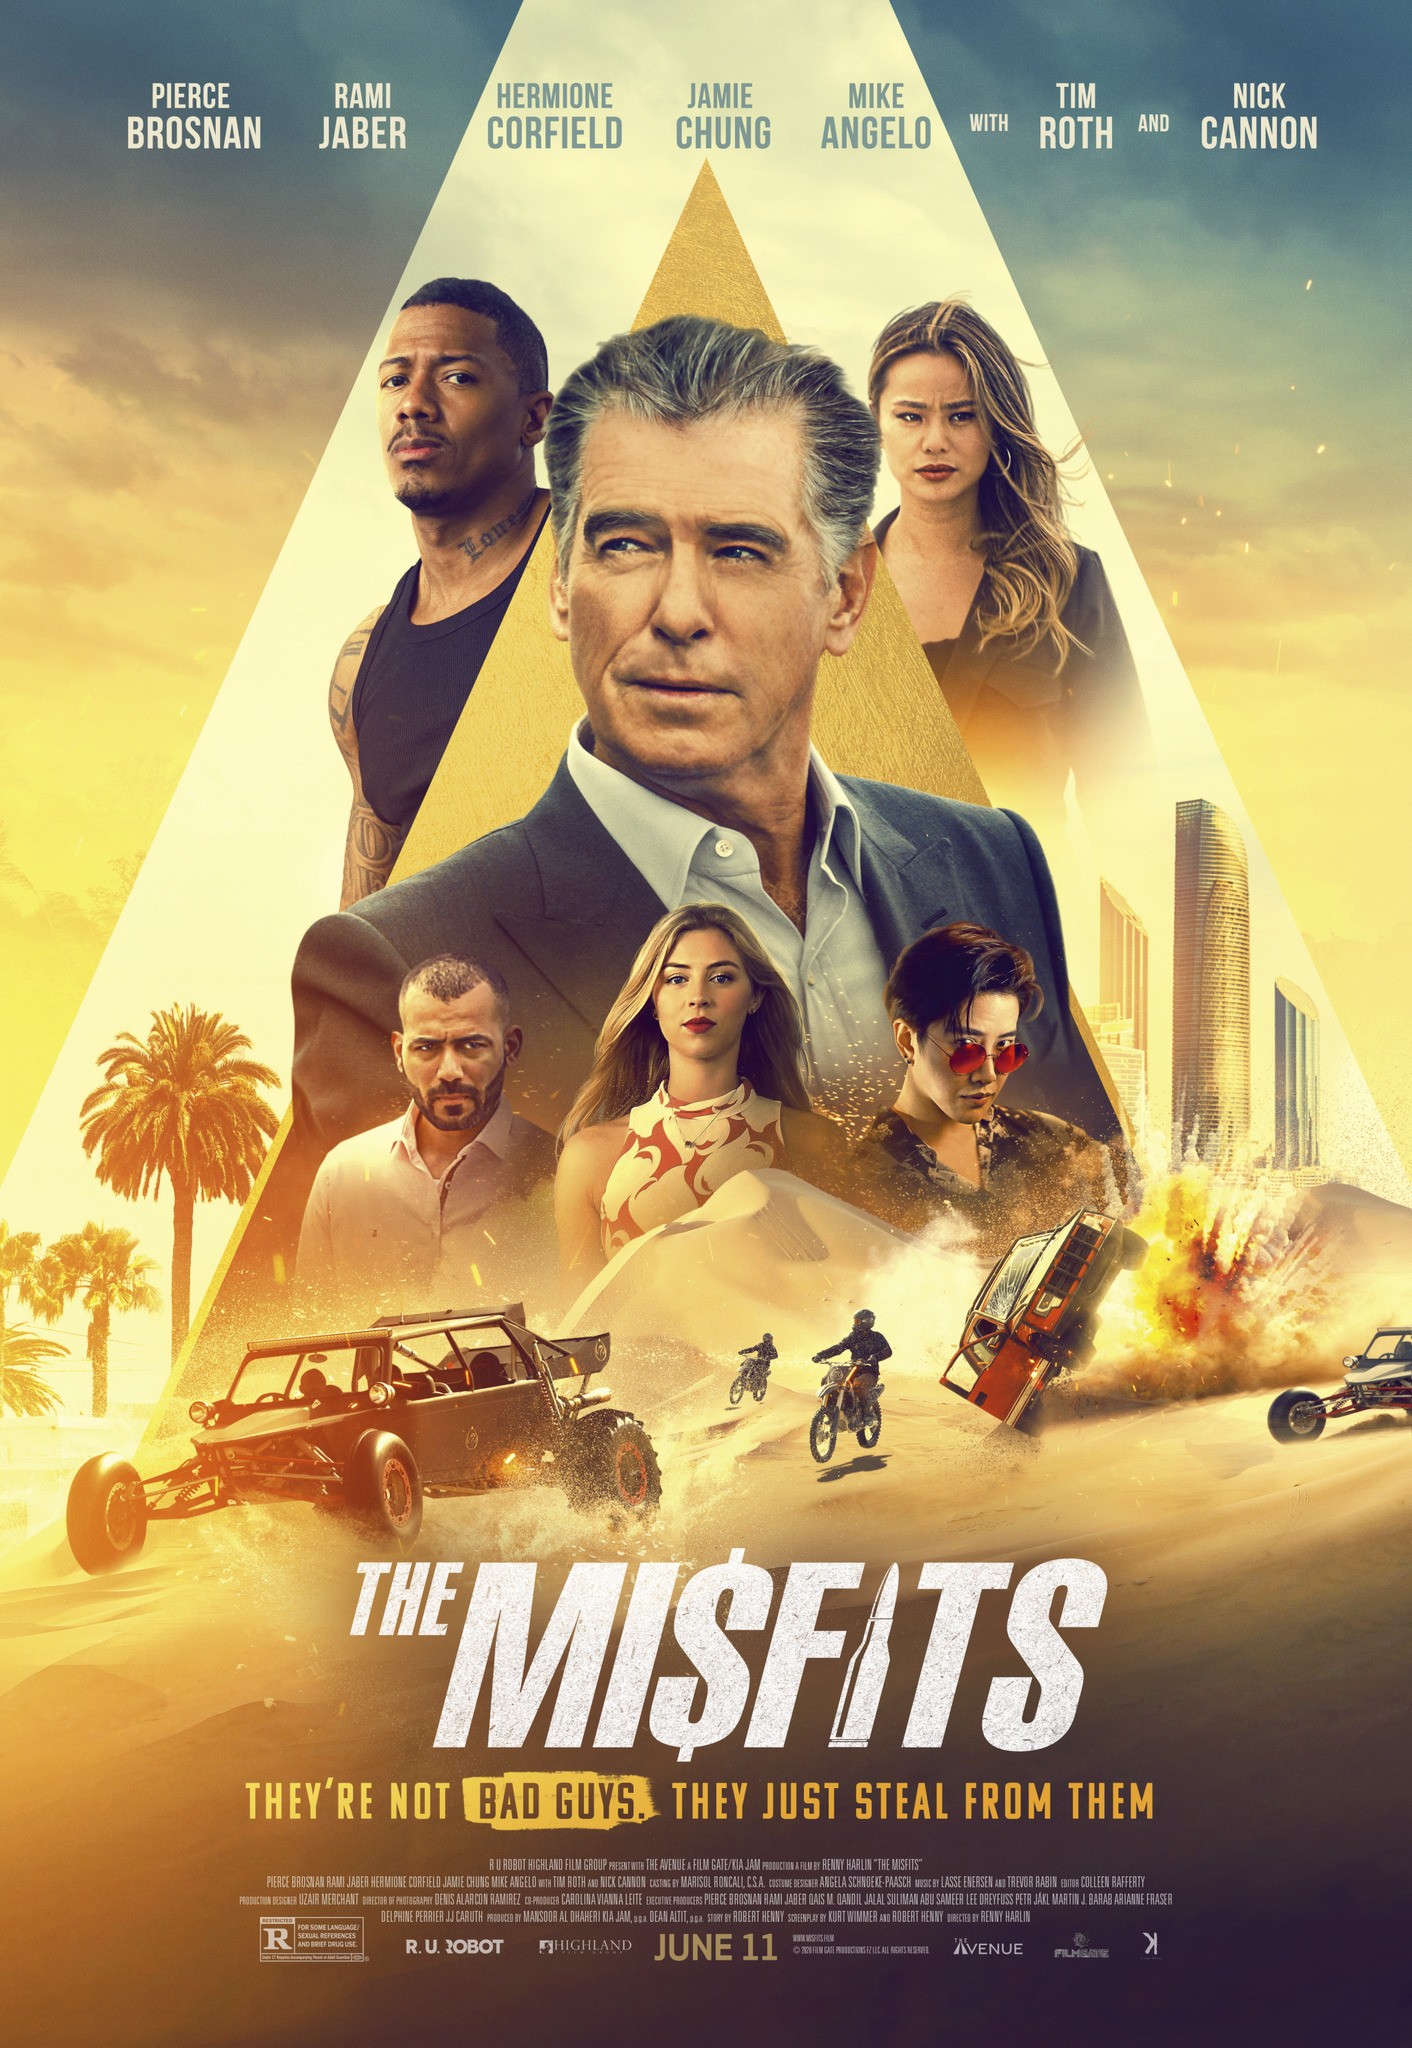 1st Trailer For 'The Misfits' Movie Starring Pierce Brosnan & Nick Cannon